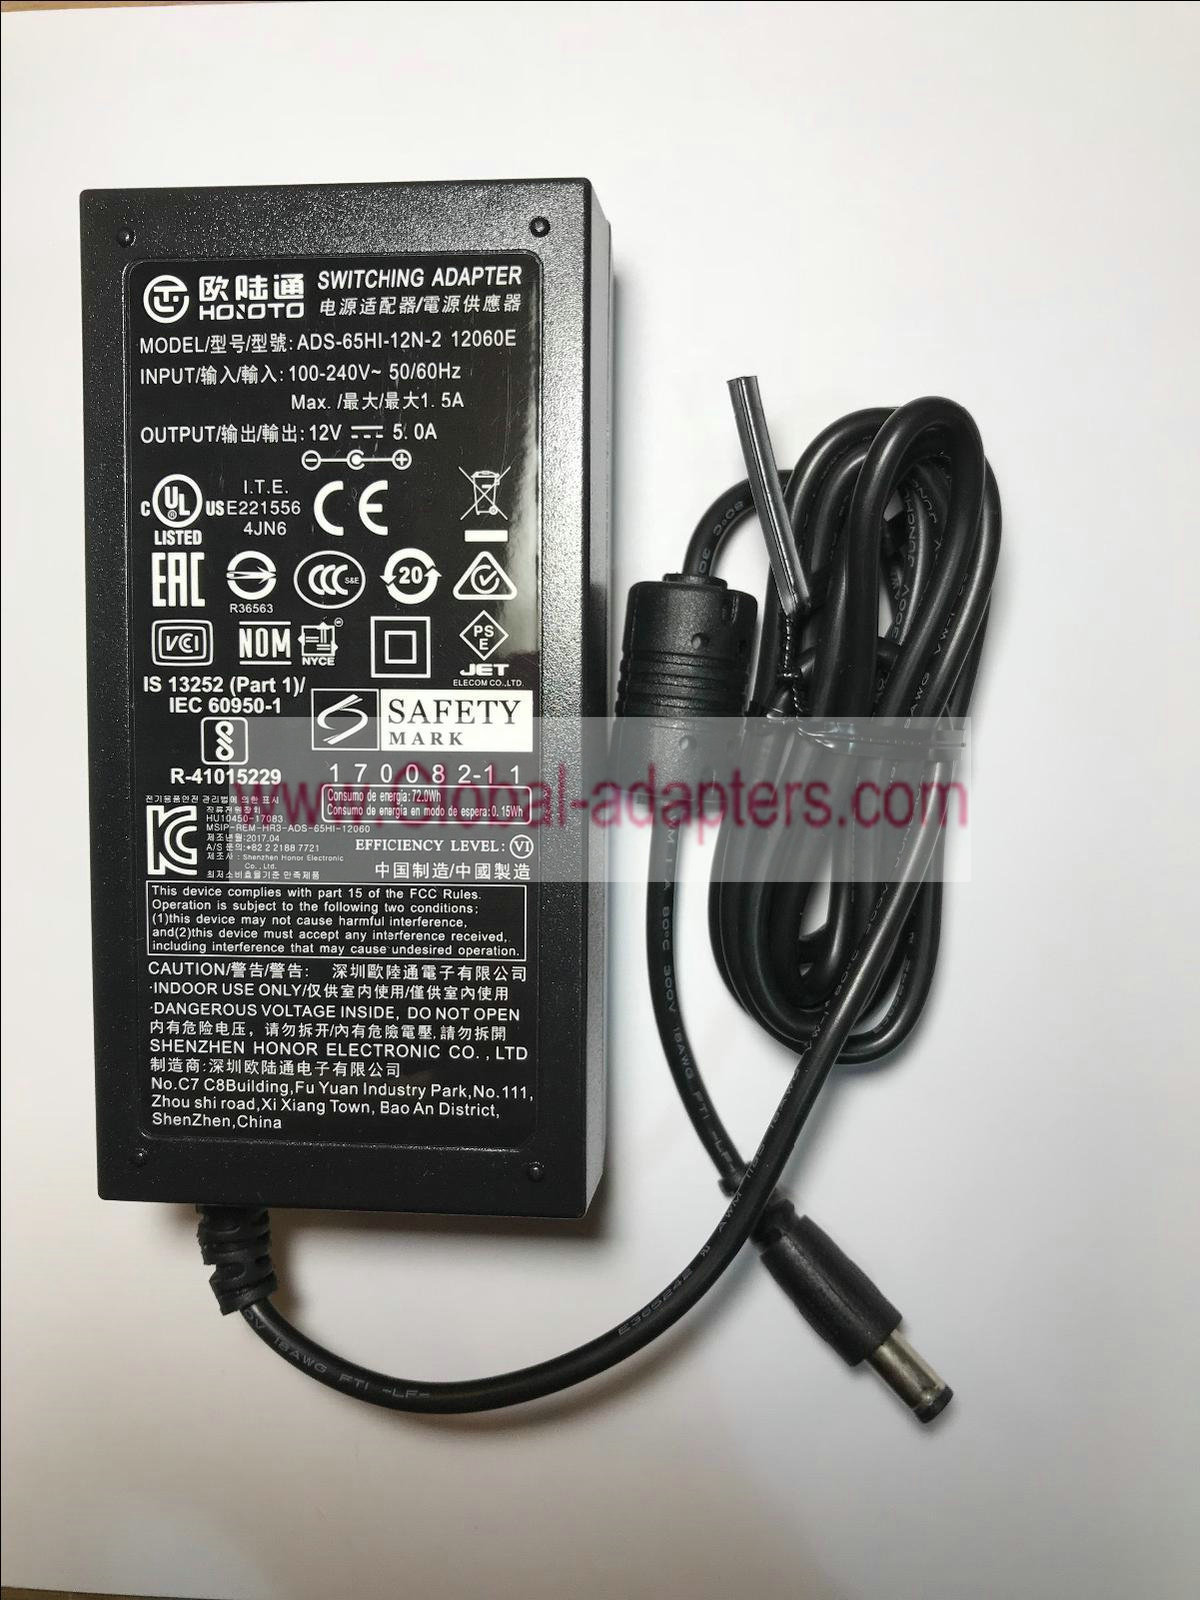 Genuine HOIOTO 12V 5.0A Switching Adapter ADS-65HI-12N-2 12060E Power Supply